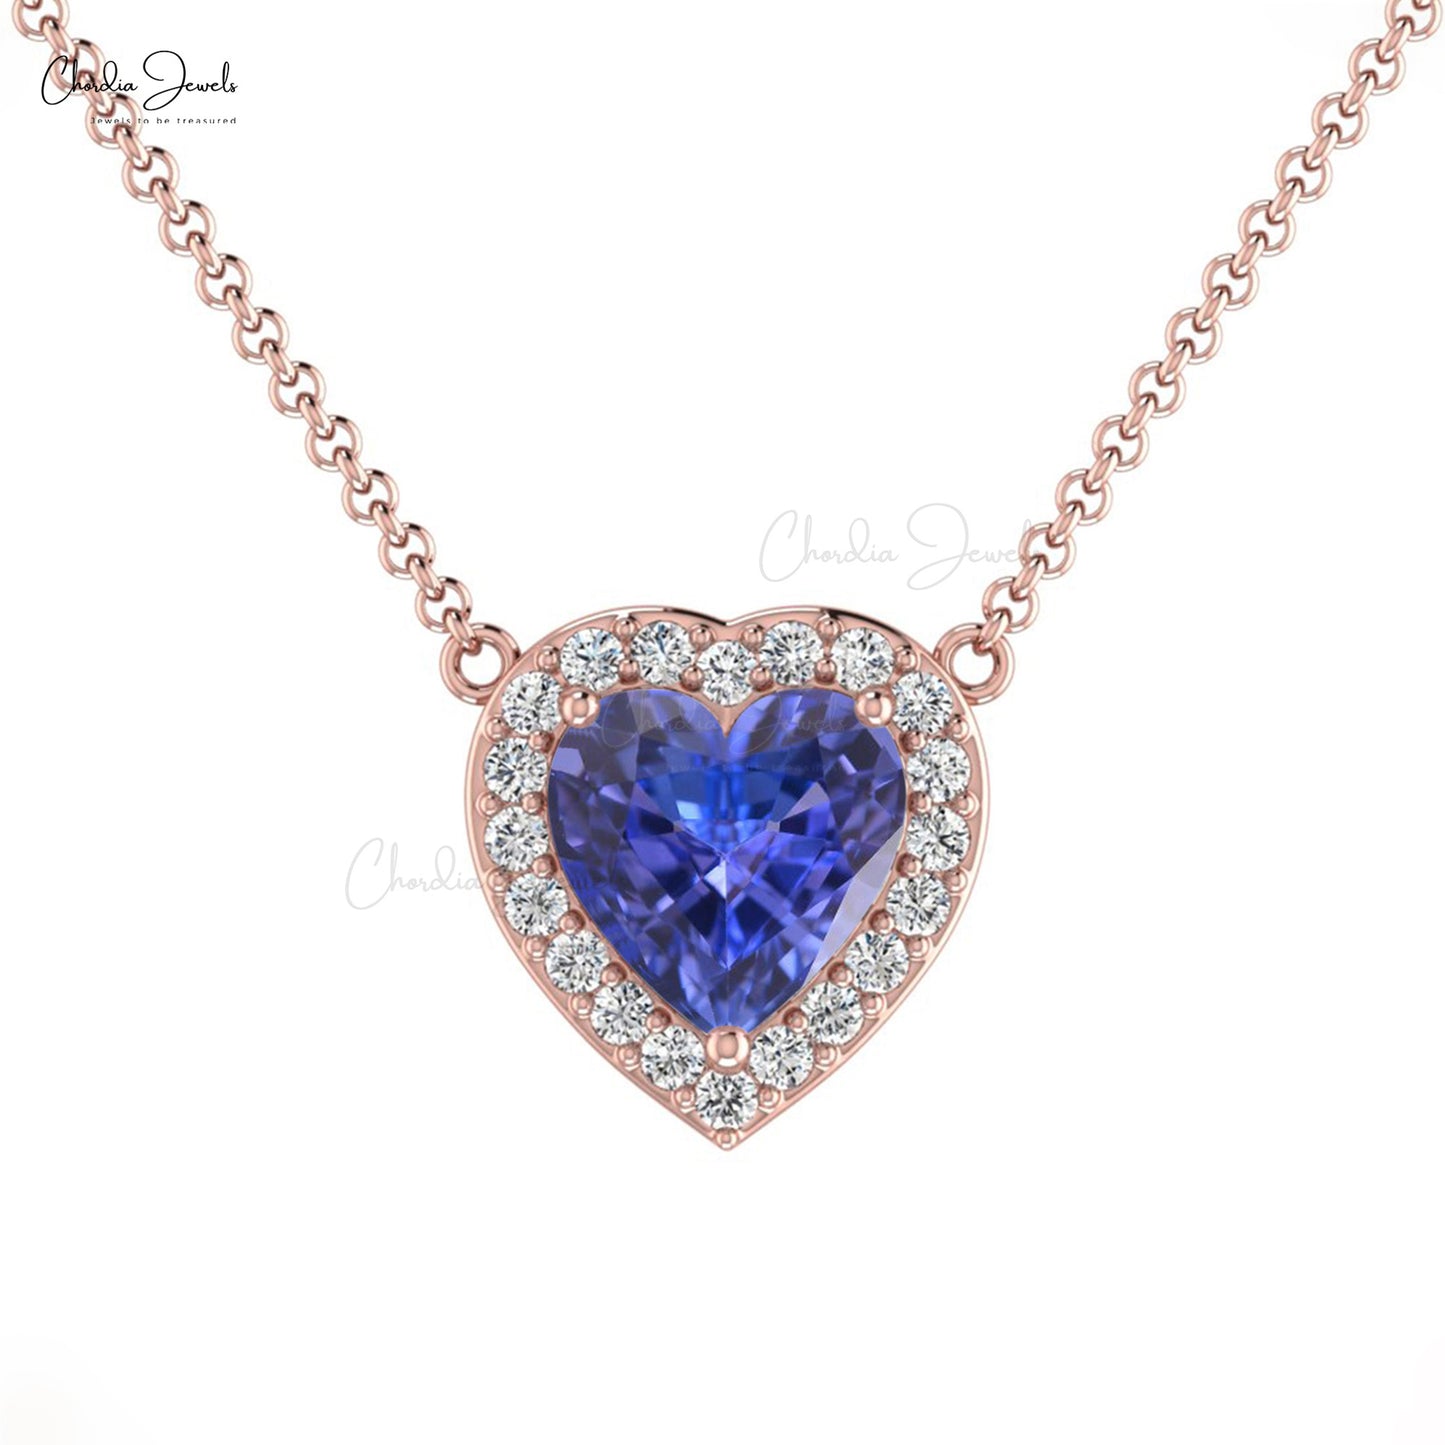 AAA Quality 5mm Heart Cut Genuine Tanzanite Halo Heart Necklace 14k Solid Gold April Birthstone Pave Set Diamond Wedding Jewelry For Gift